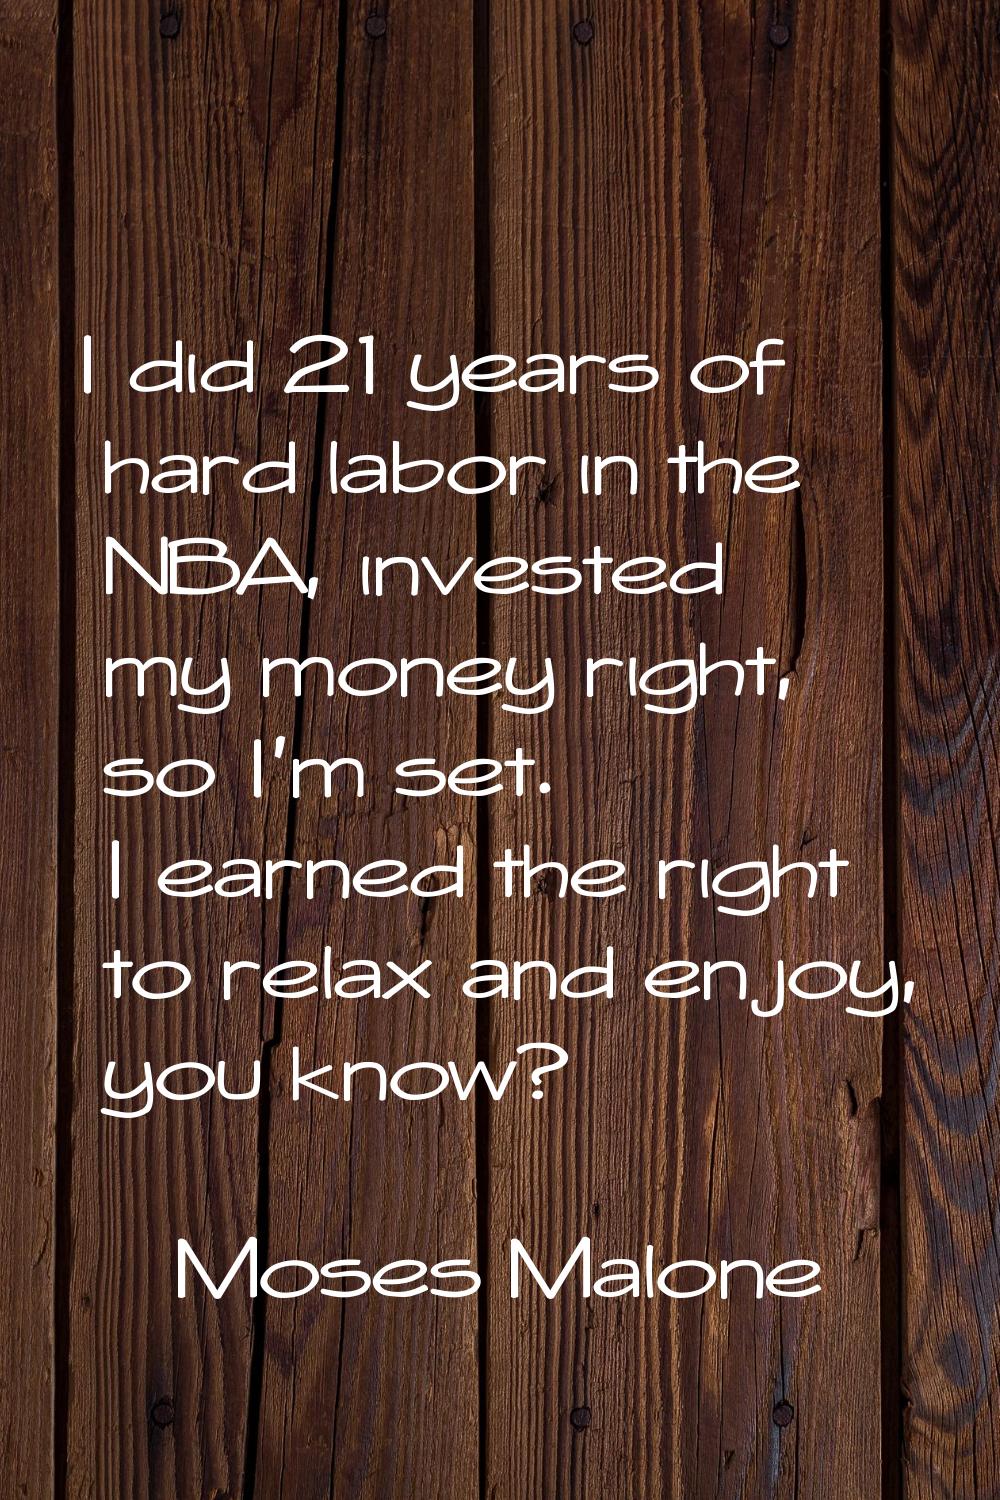 I did 21 years of hard labor in the NBA, invested my money right, so I'm set. I earned the right to